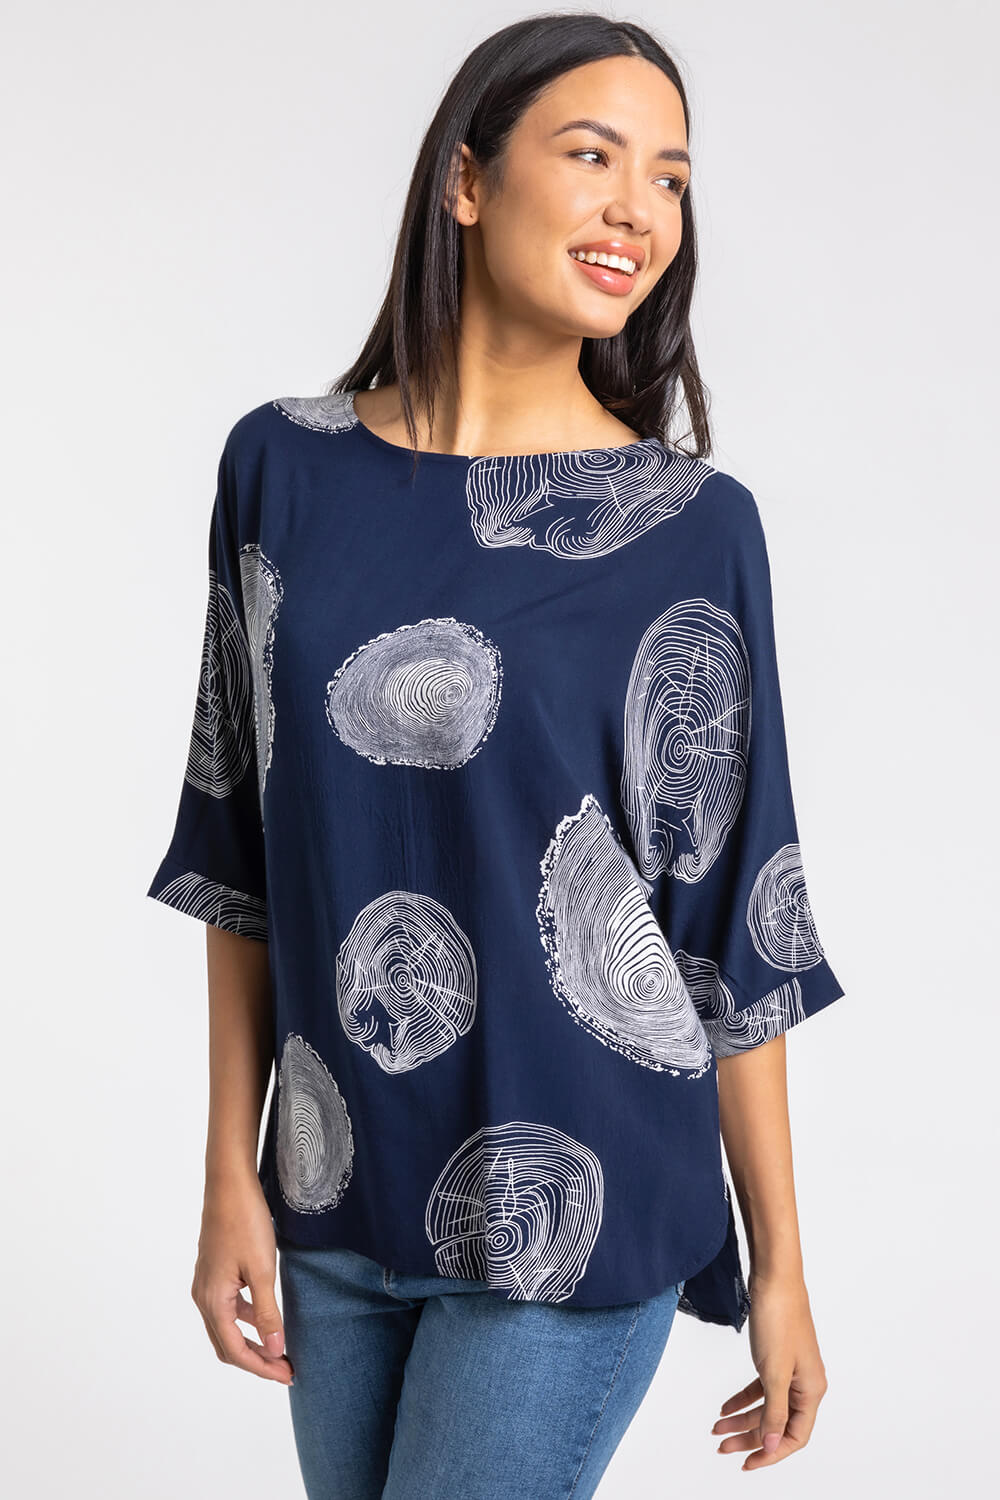 Linear Abstract Print Tunic Top in Navy - Roman Originals UK